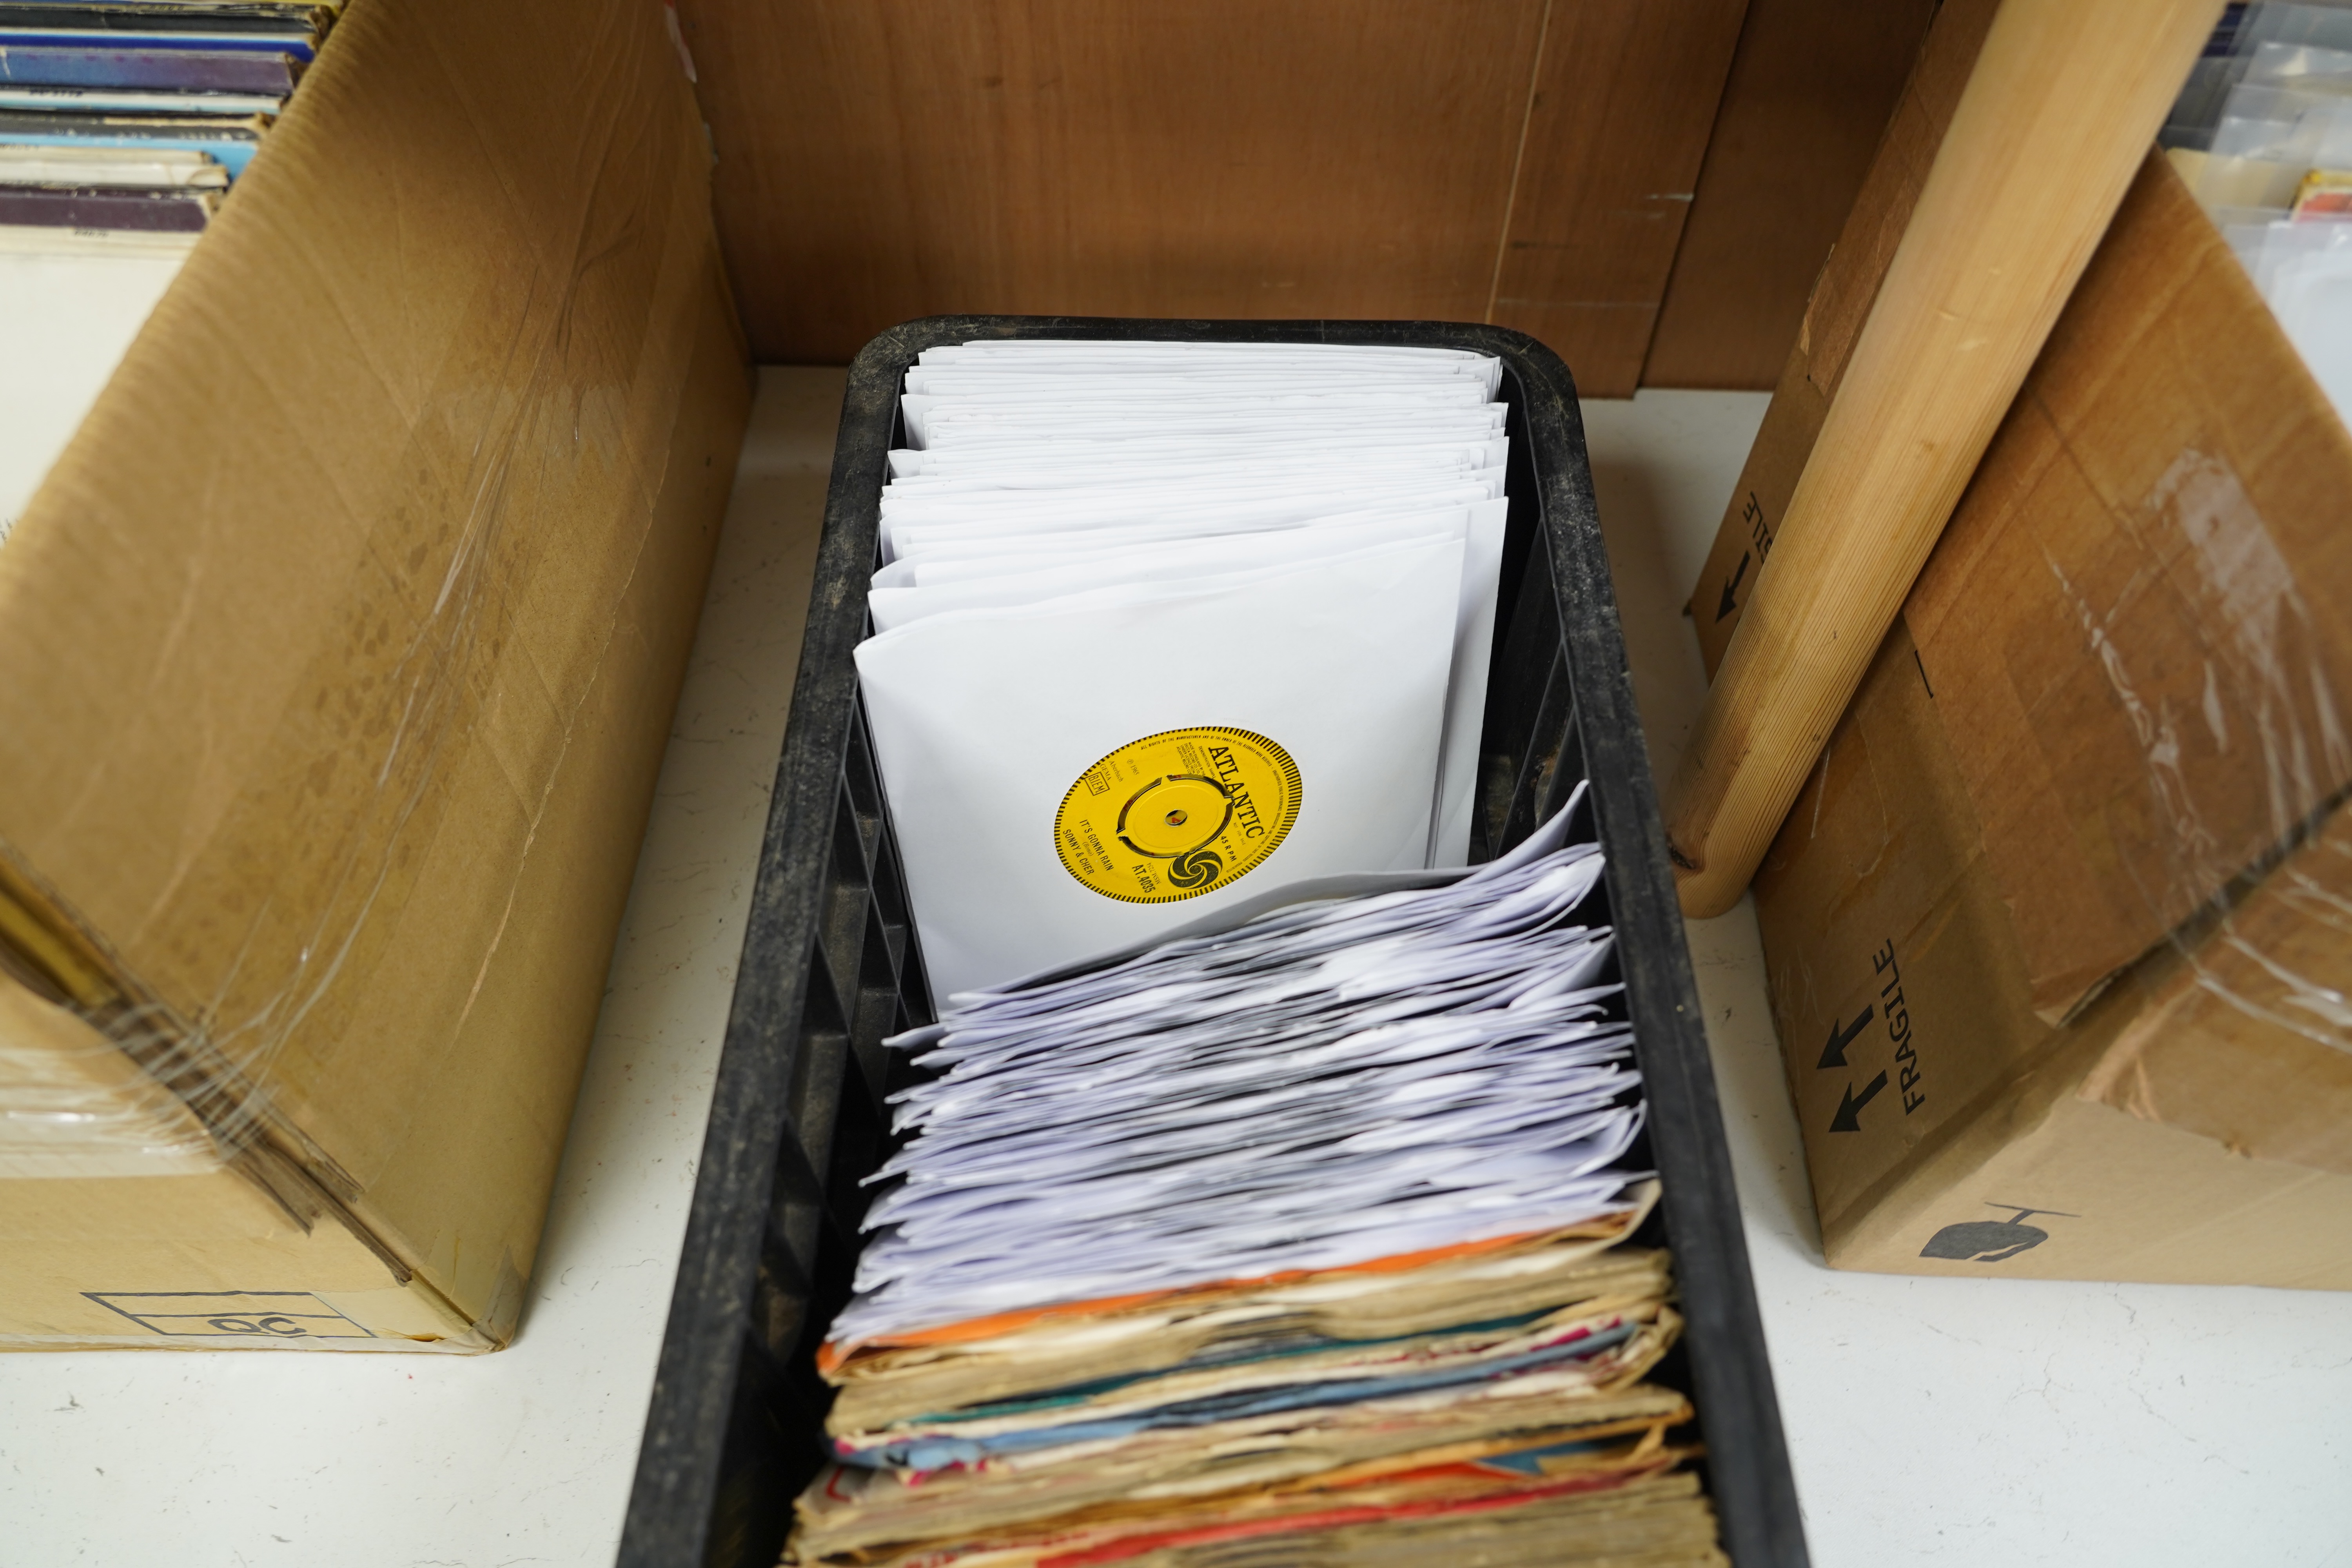 One hundred and thirty-six 7” singles, all with printed demo labels (some also with printed release date), record labels include HMV, Verve, Capitol, UA, Fontana, Elekra, London, etc. Artists include; Bob Dylan, Small Fa